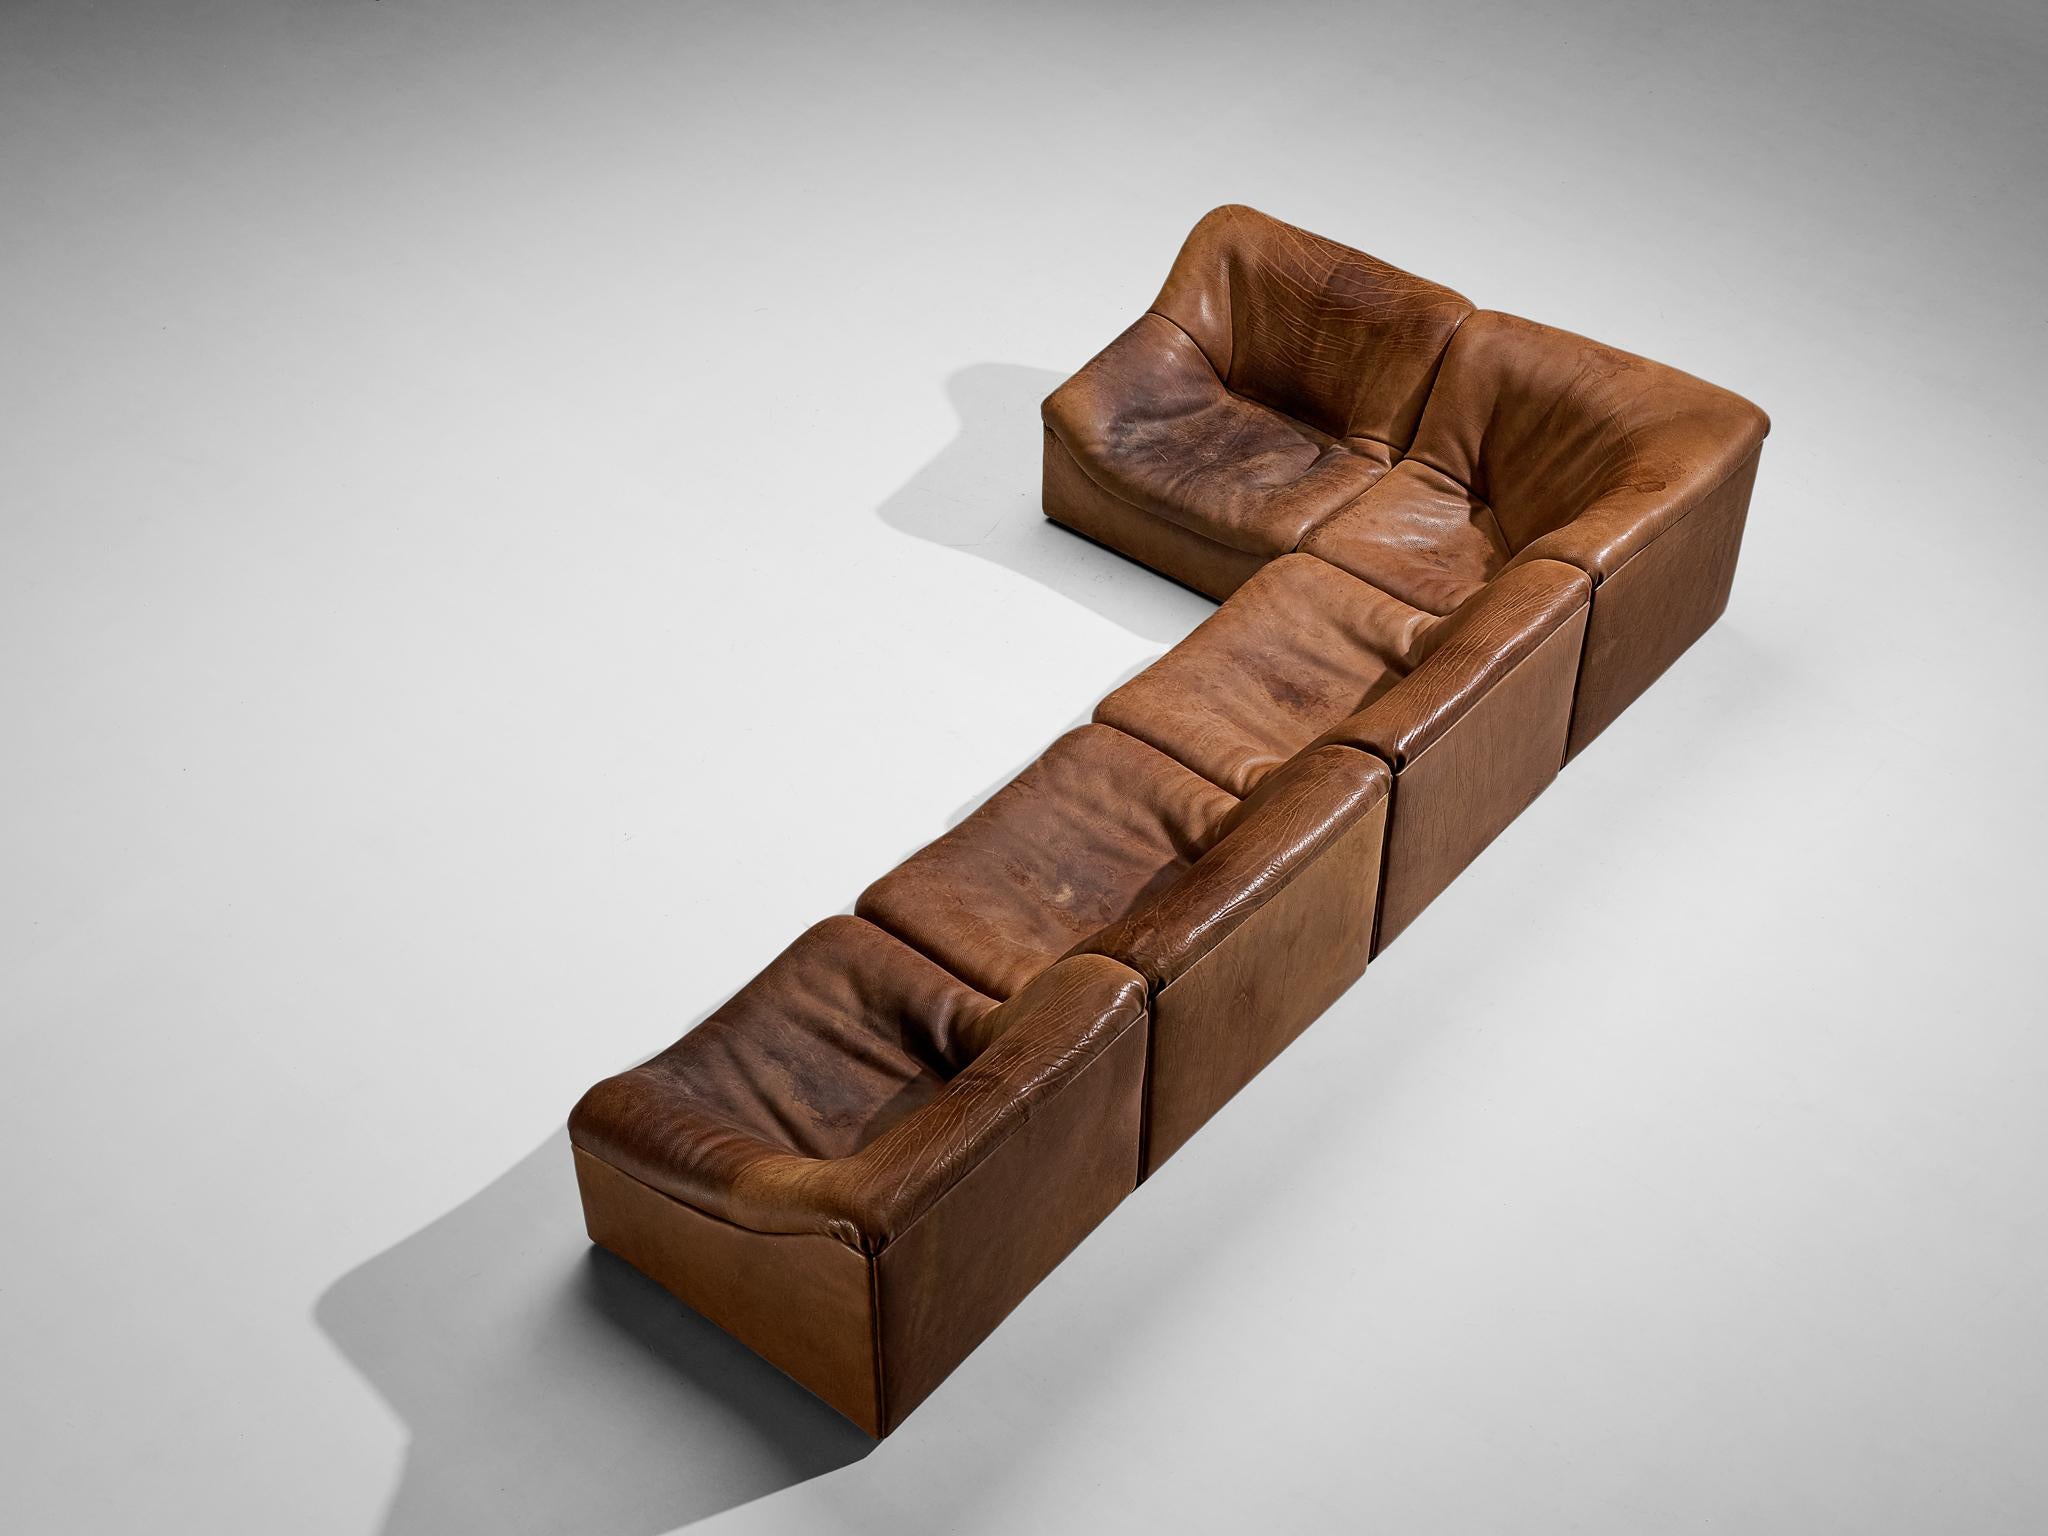 De Sede, 'DS 46' sectional sofa, heavily patinated cognac buffalo leather, Switzerland, 1970s.

Comfortable modular sectional sofa consisting out of five elements in thick buffalo leather by De Sede. This model features a solid base with a